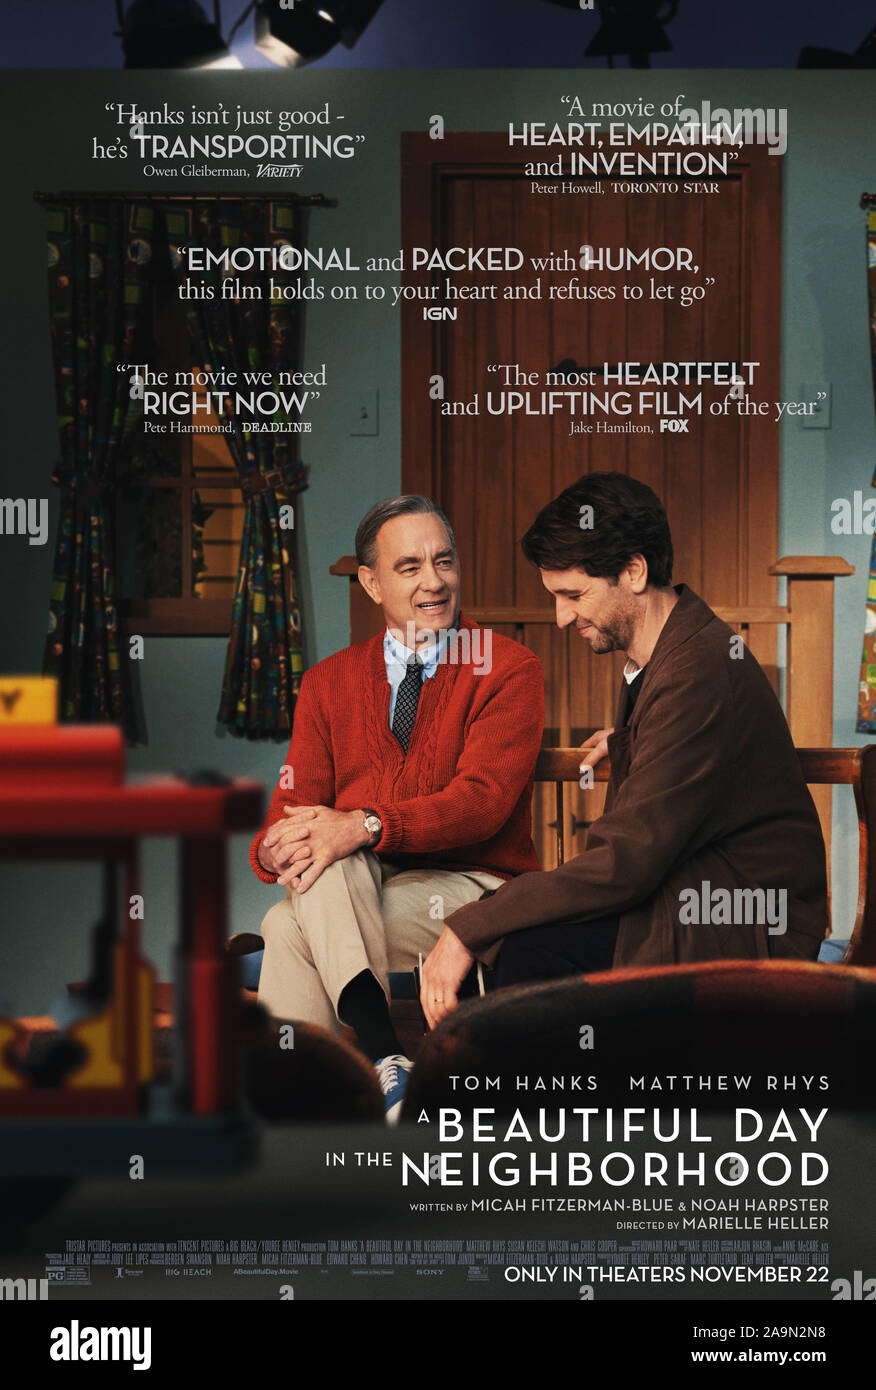 RELEASE DATE: November 22, 2019 TITLE: A Beautiful Day in The Neighborhood STUDIO: TriStar Pictures DIRECTOR: Marielle Heller PLOT: The story of Fred Rogers, the honored host and creator of the popular children's television program, Mister Rogers' Neighborhood (1968). STARRING: TOM HANKS as Fred Rogers, MATTHEW RHYS as Lloyd Vogel poster art. (Credit Image: © TriStar Pictures/Entertainment Pictures) Stock Photo